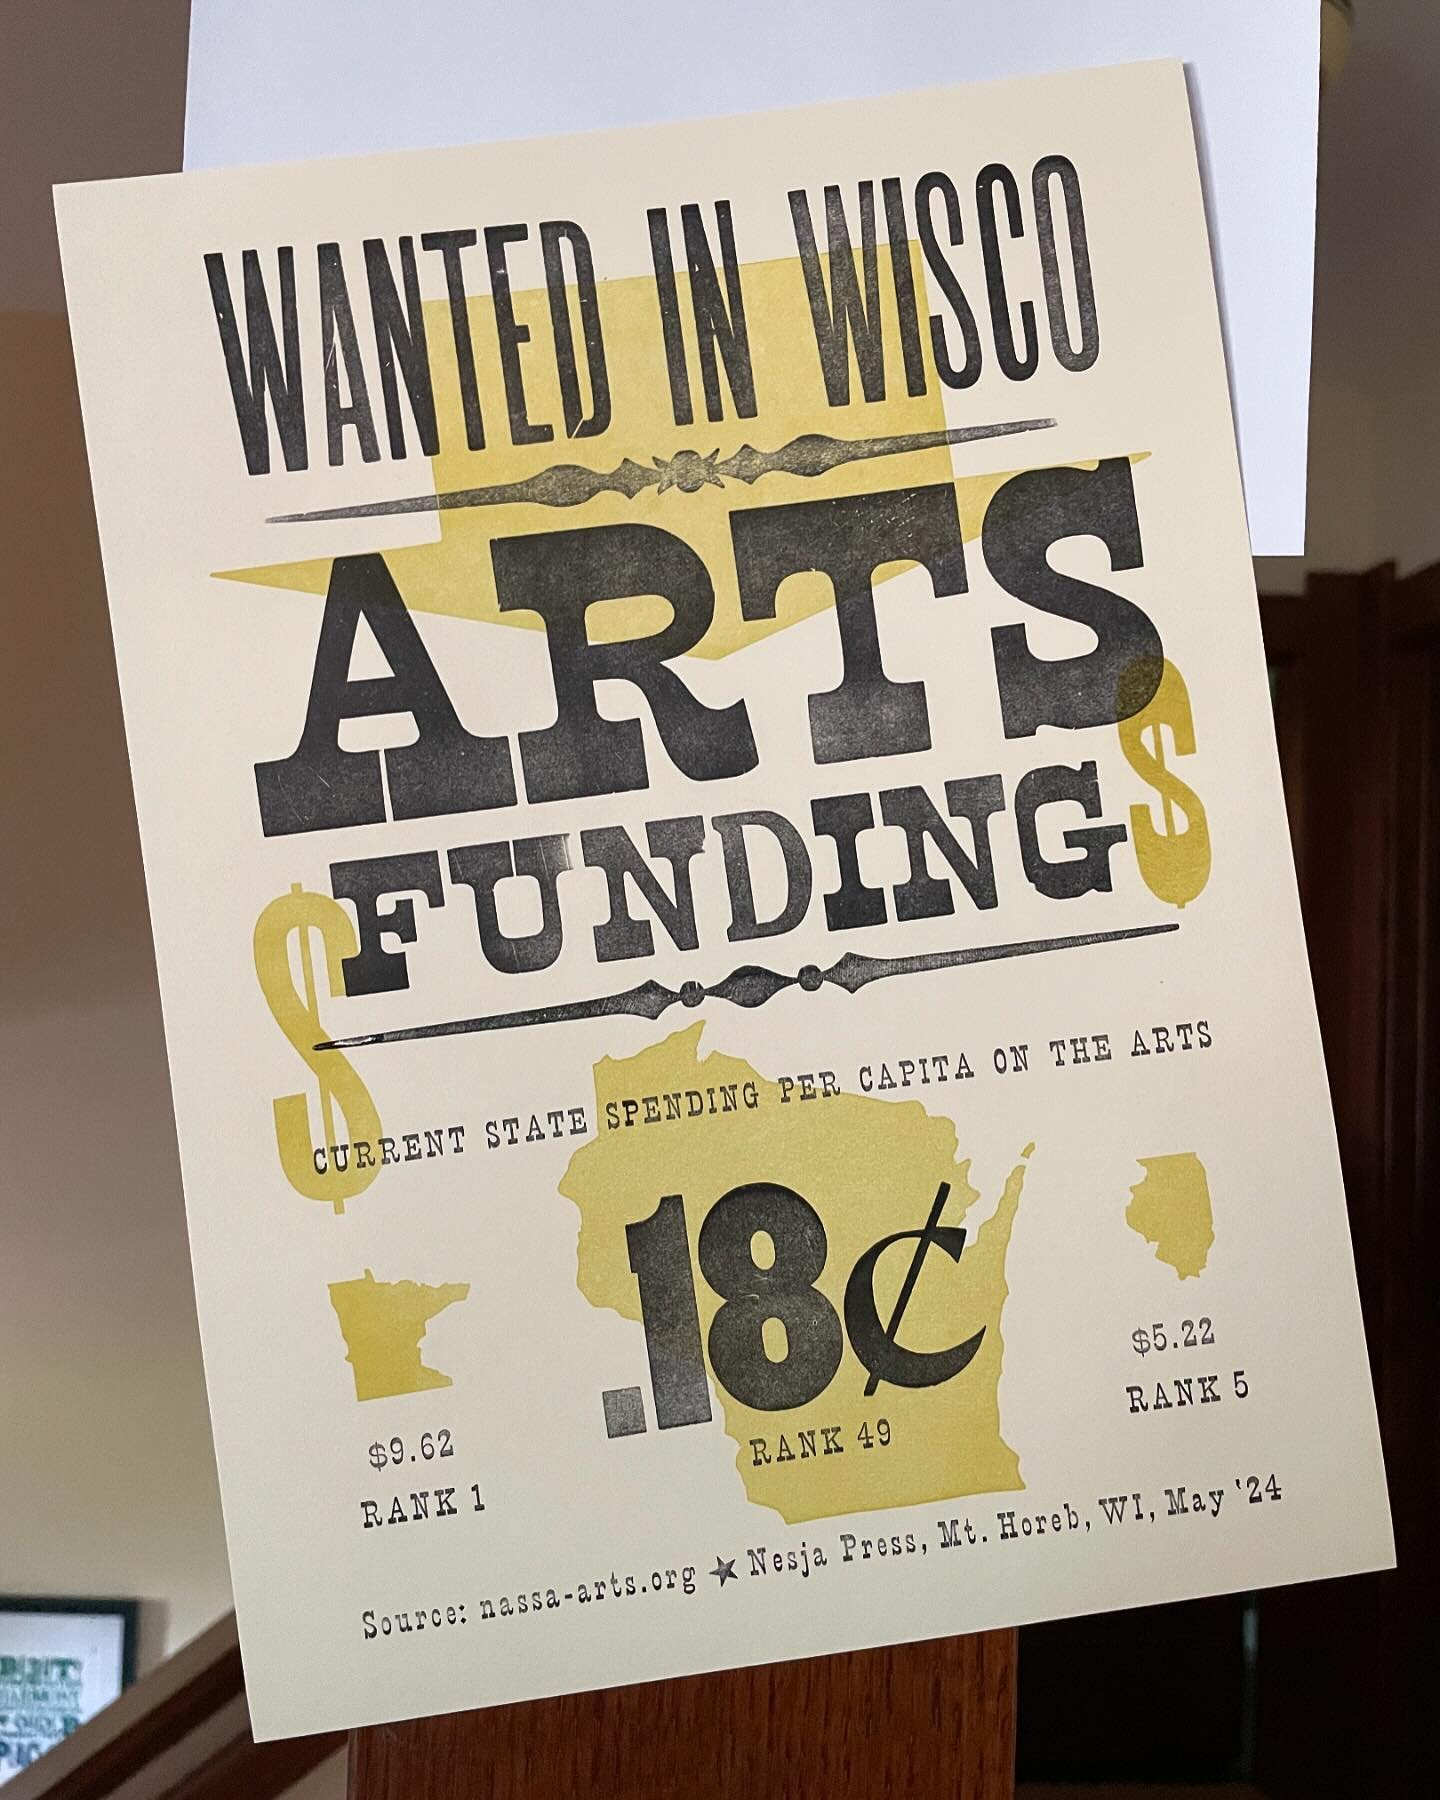 Yikes! Did you know Wisconsin ranks 49 out of 50 states for public funding of the arts? Visit Nesja Press today (May 19) from 10 - 5 to pull a free poster and help spread the word! 307 Green Street, Mount Horeb, WI. 
#wisconsinarts #nassa #danearts #